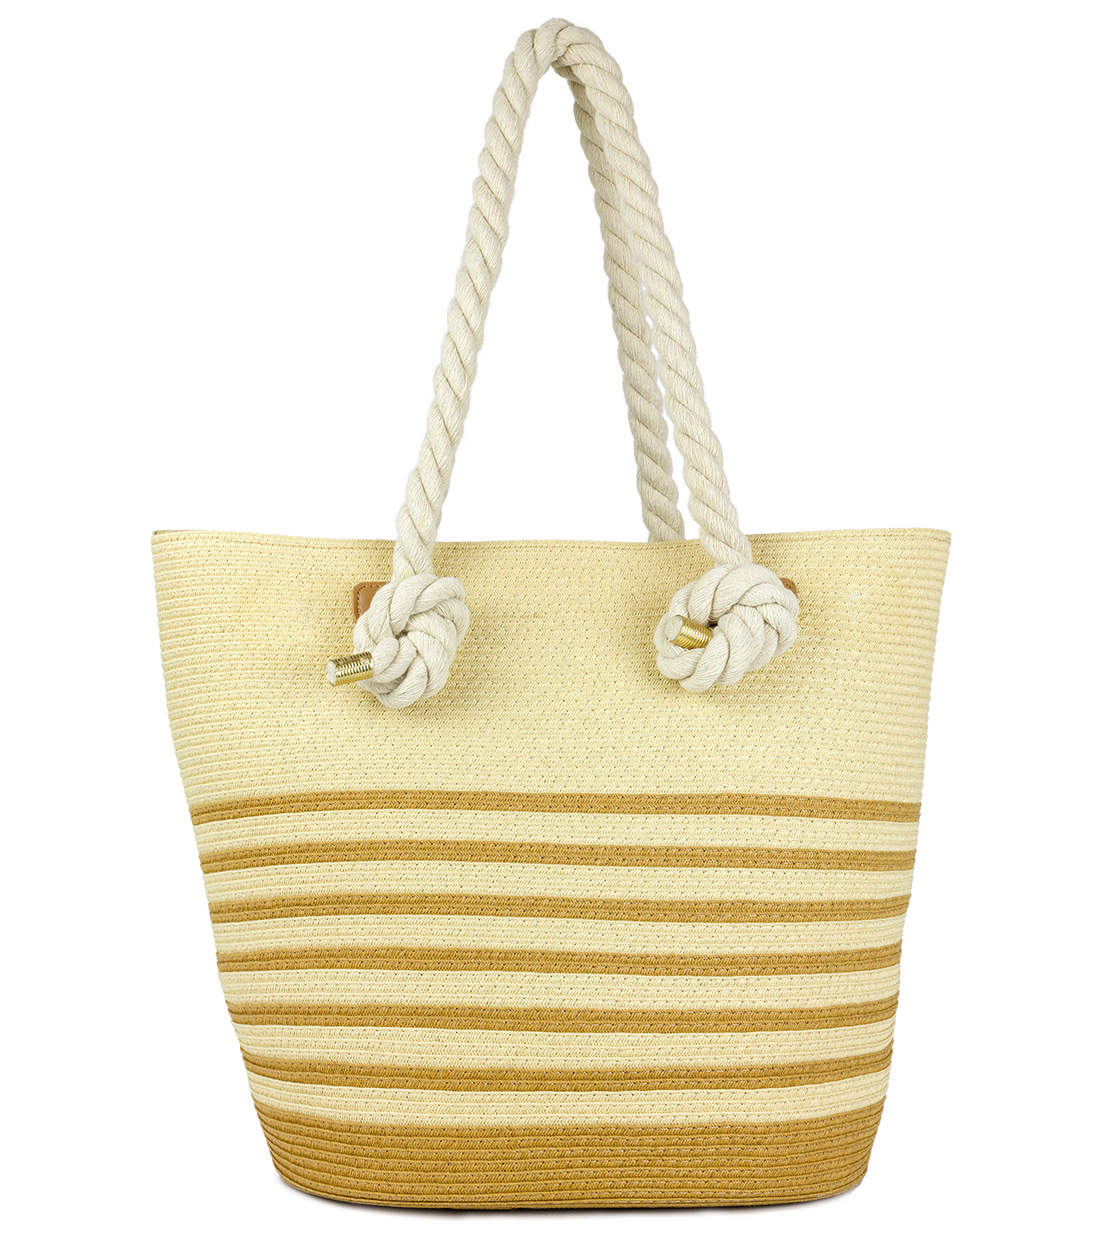 Magid Women's Adult Paper Straw Beach Bag Toast - image 1 of 1